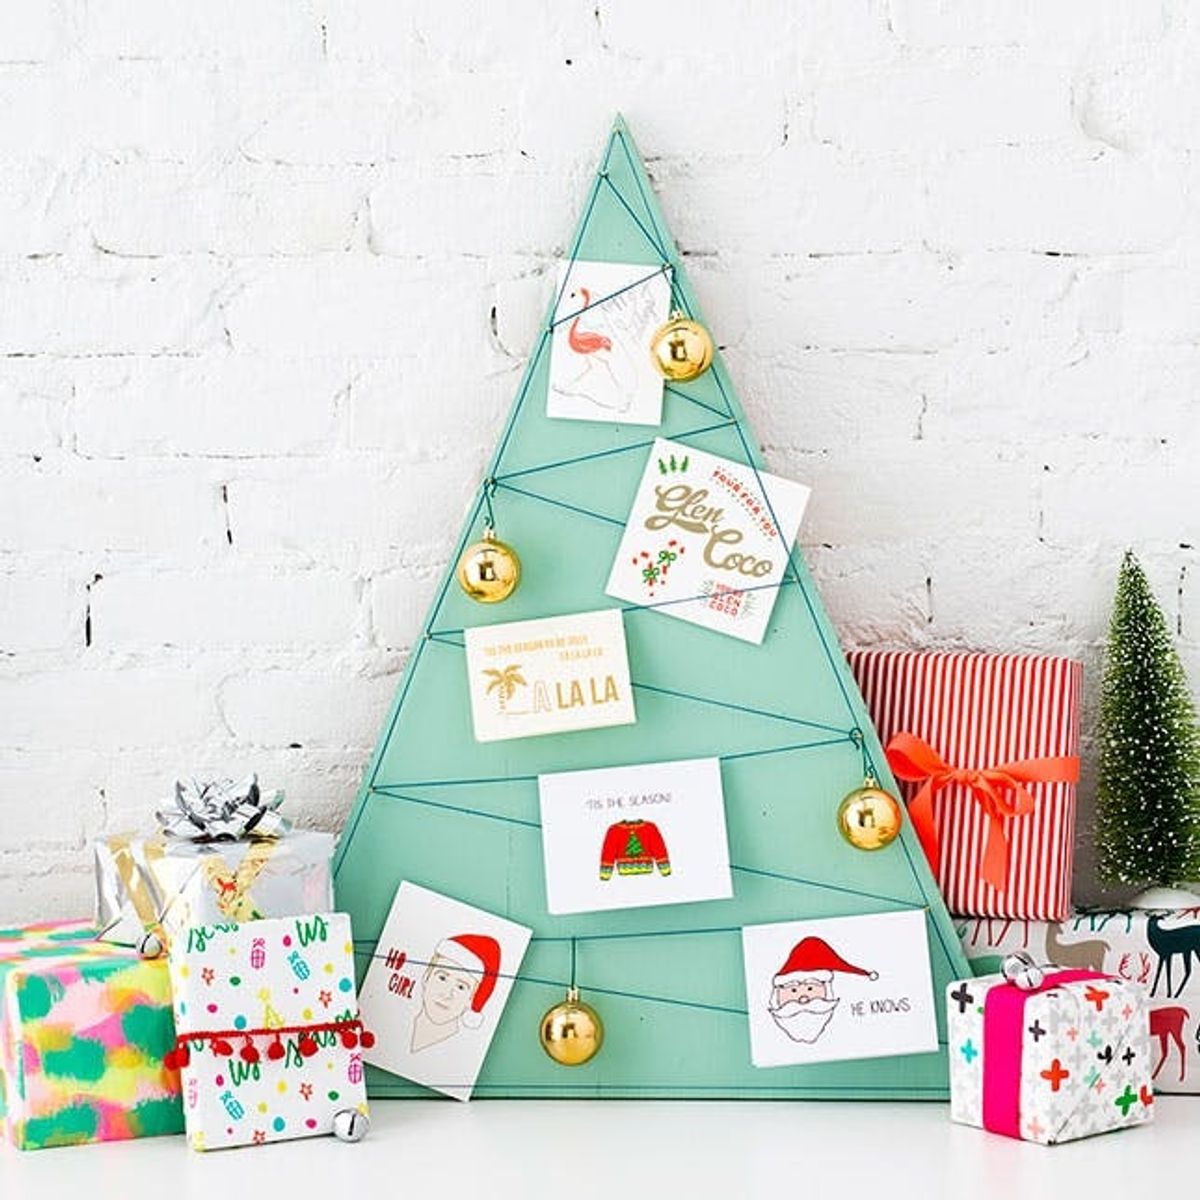 This Is the Best Place to Display Your Holiday Cards